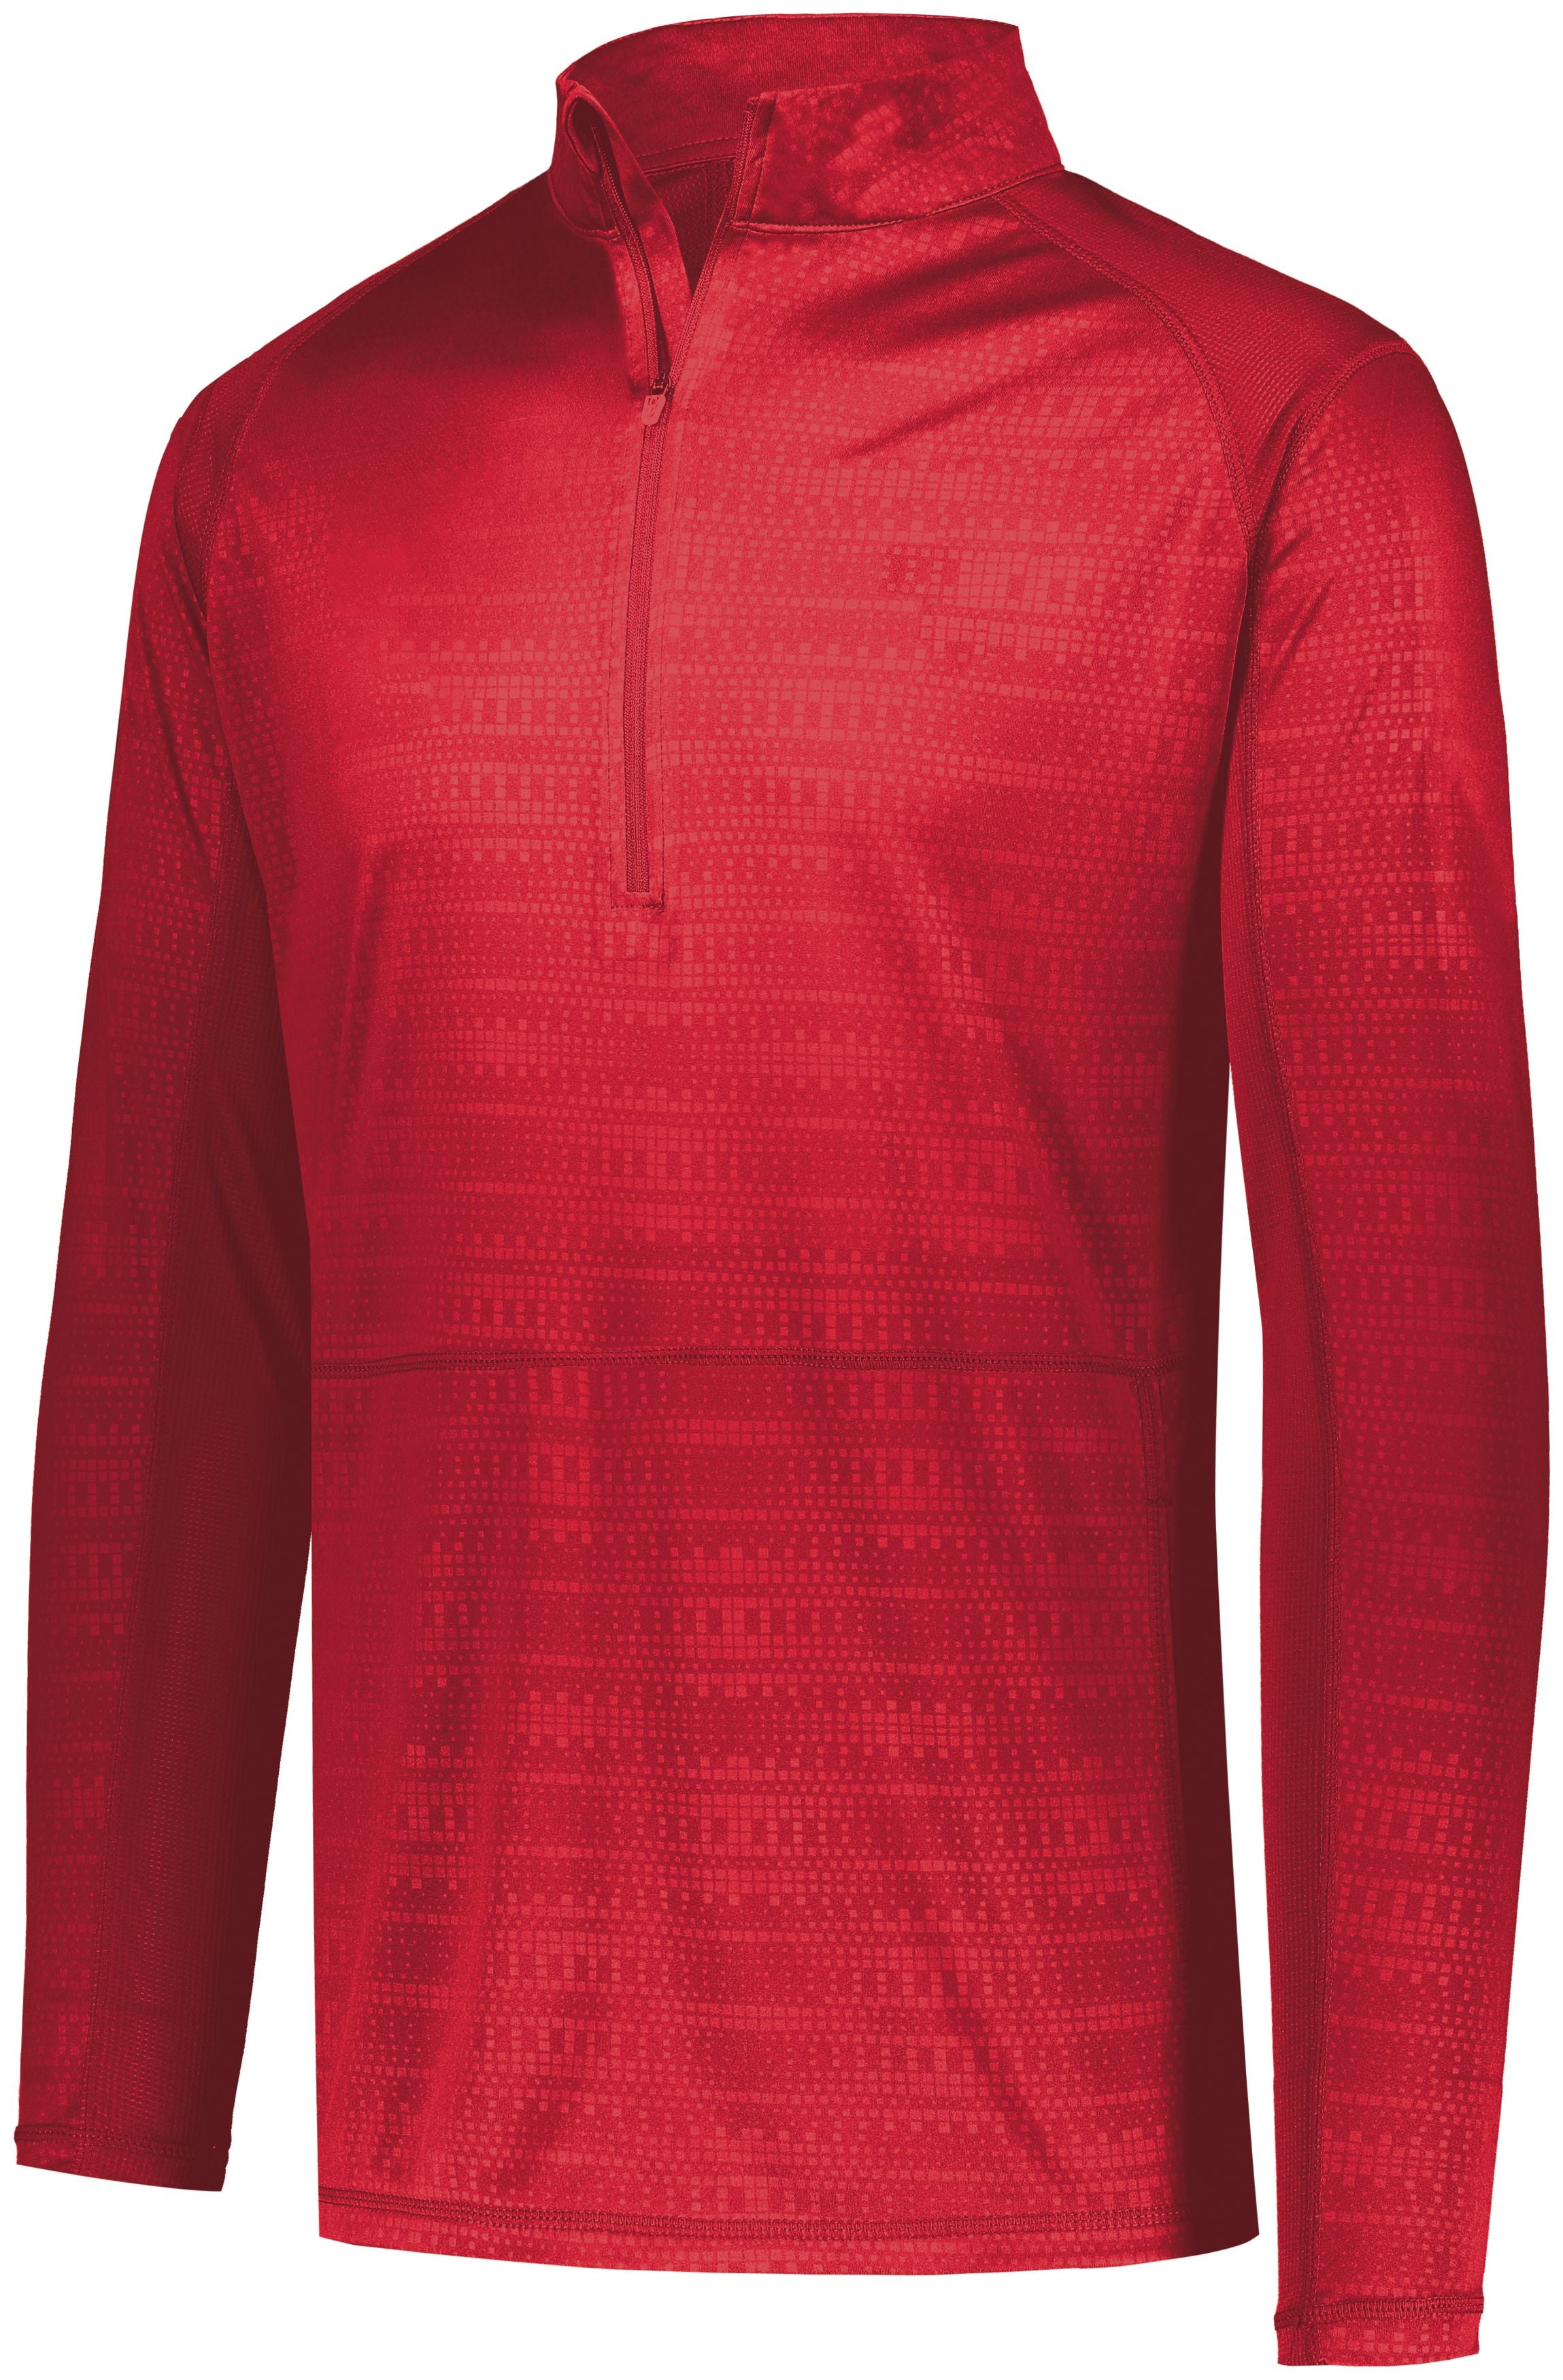 Holloway Converge 1/2 Zip Pullover in Scarlet  -Part of the Adult, Holloway, Shirts, Corporate-Collection, Converge-Collection product lines at KanaleyCreations.com